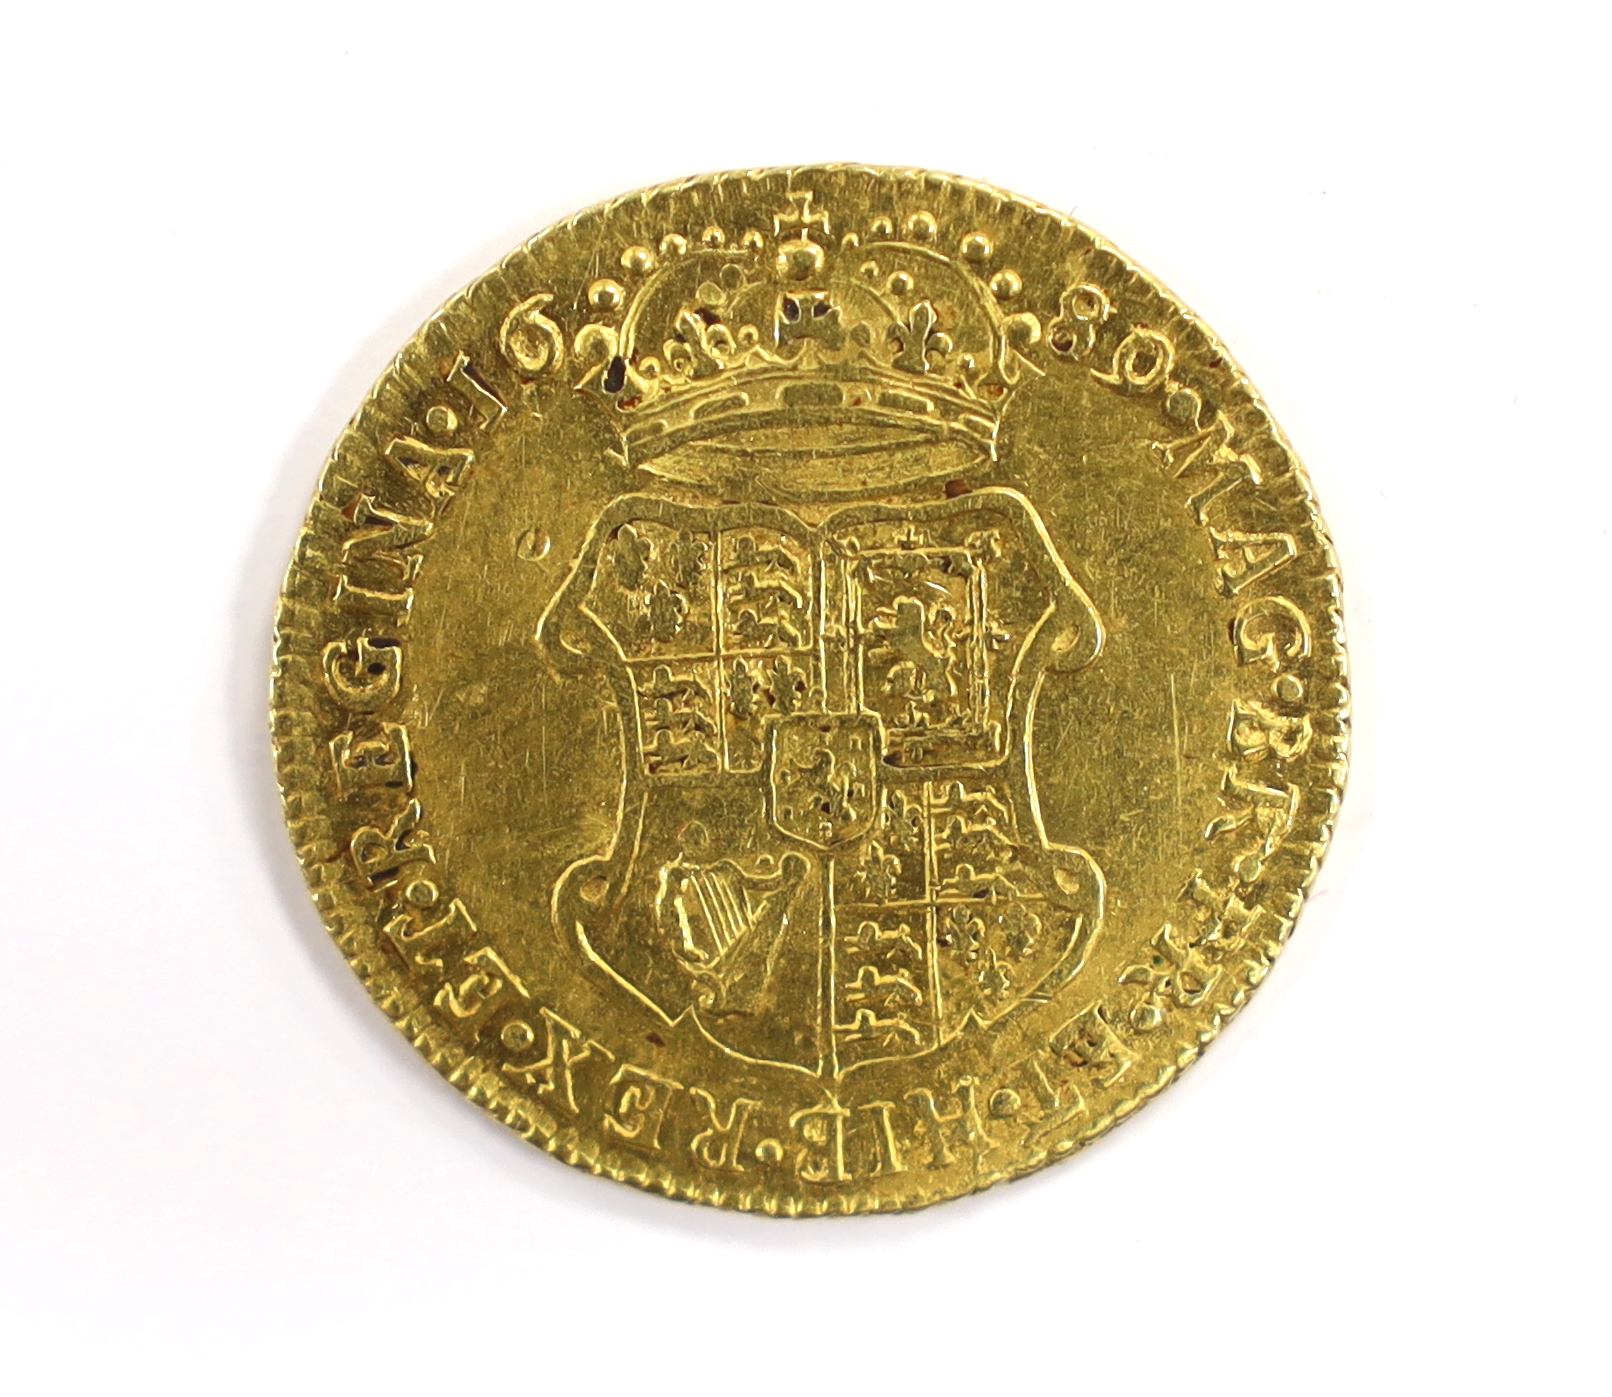 British gold coins - A William and Mary gold guinea, 1689, probably demounted at 12 o’clock, otherwise good Fine (S3426), Provenance bought from Richard Lobel and co Ltd, London, 7th March 1977 for £275